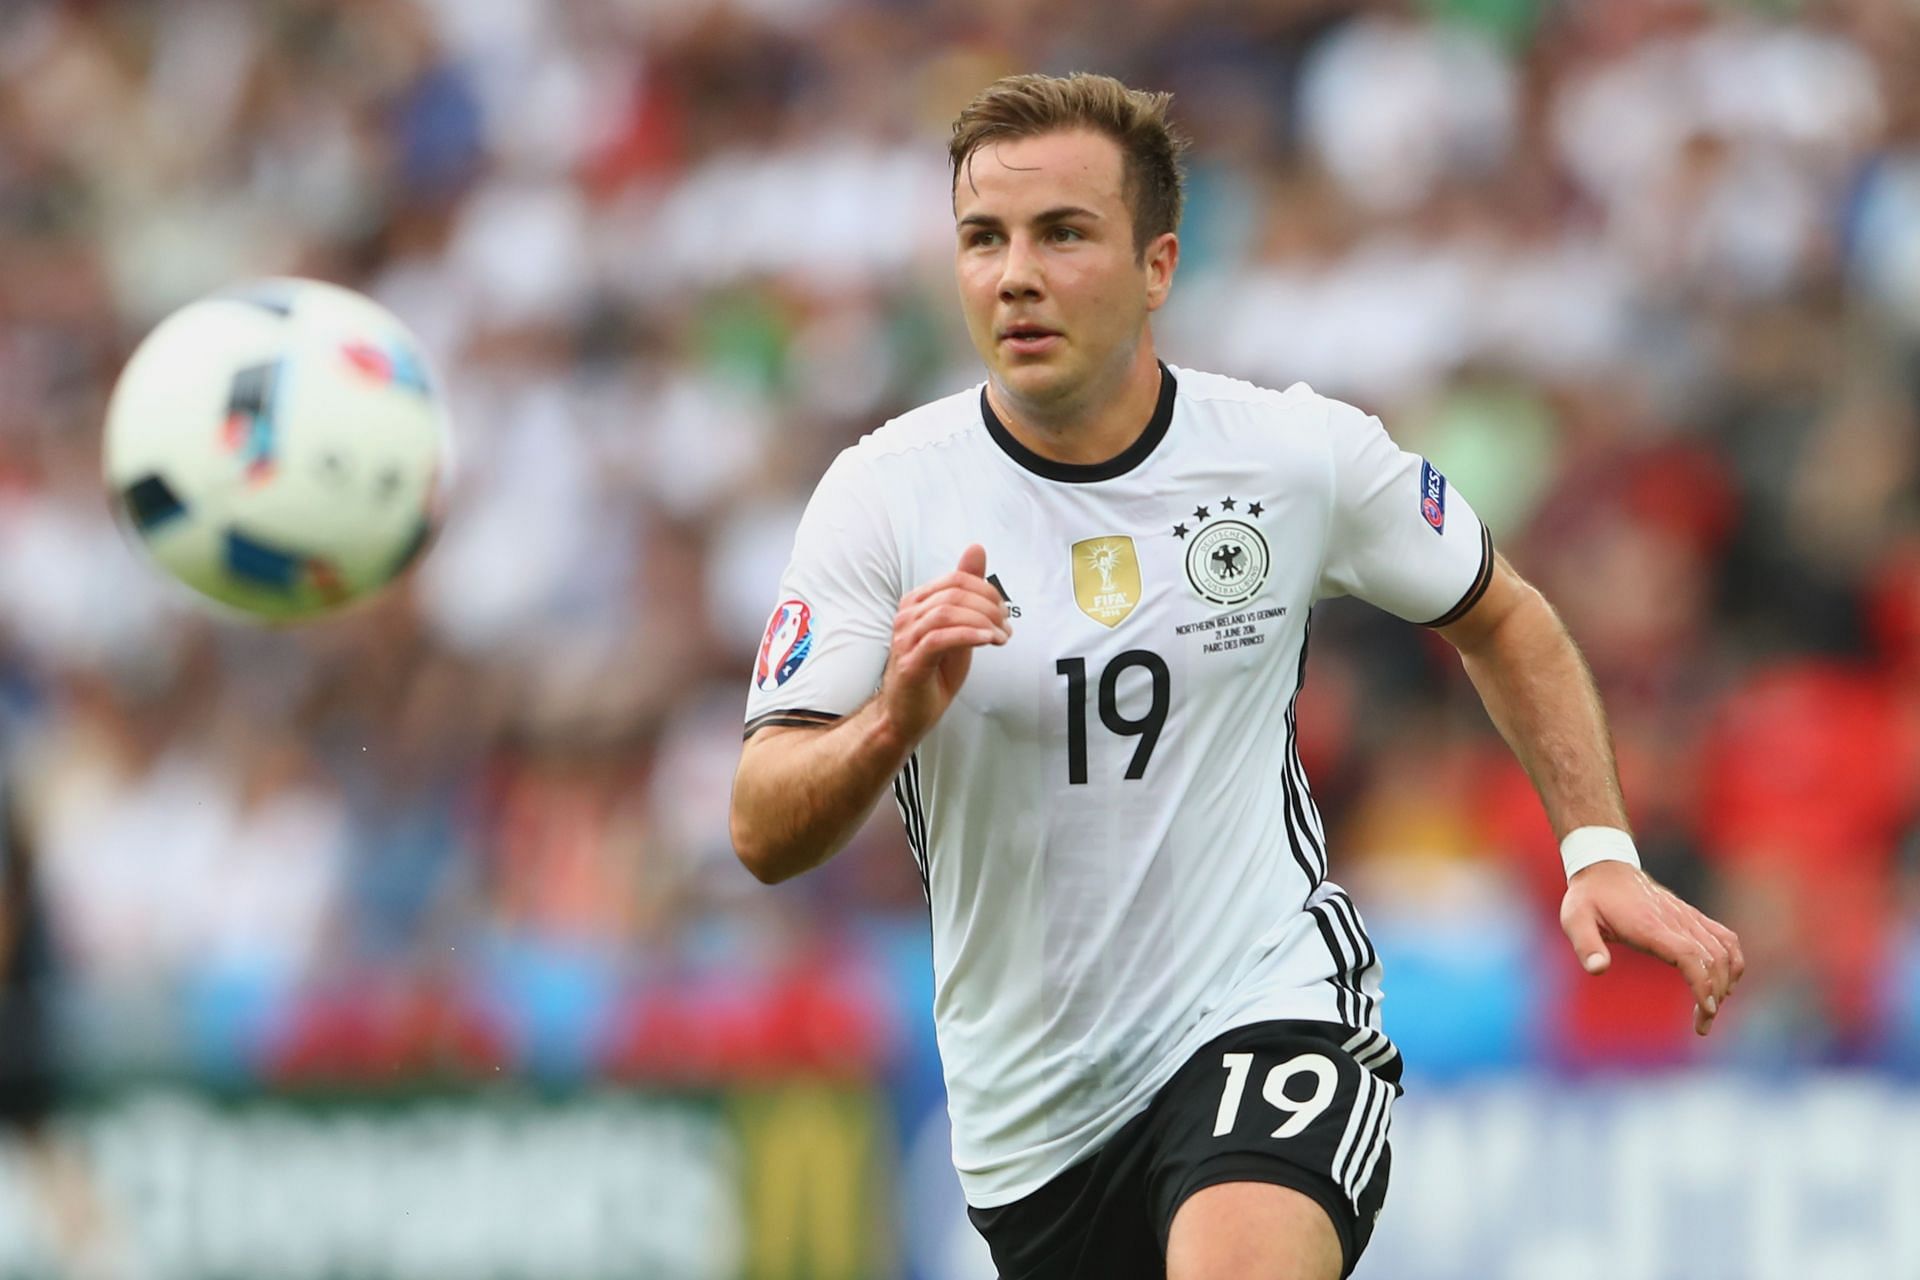 Mario Gotze scored the winner for Germany in the 2014 FIFA World Cup final against Argentina.